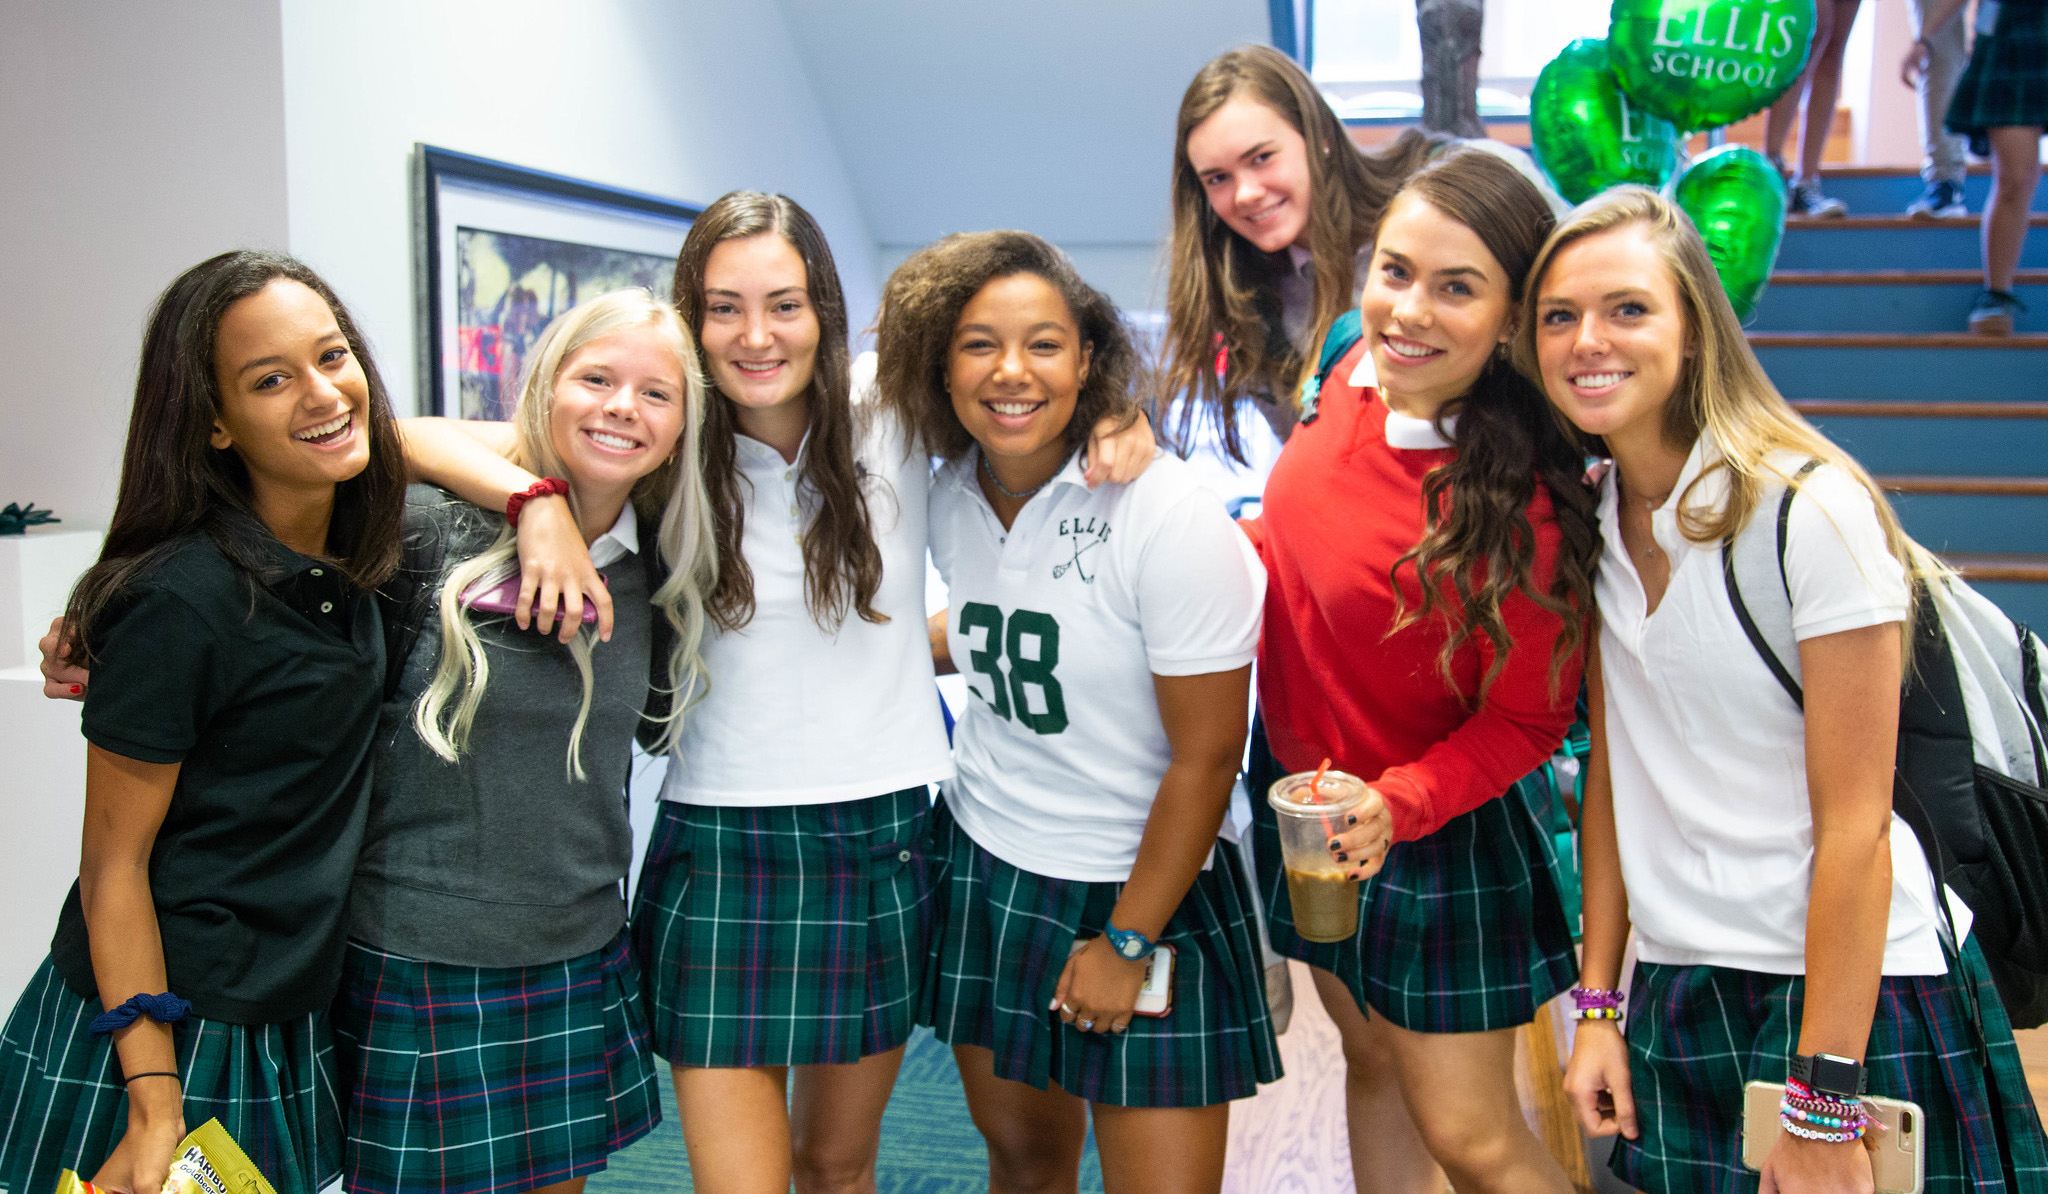 Stereotypes vs. Reality: My Experience at an All-girls School